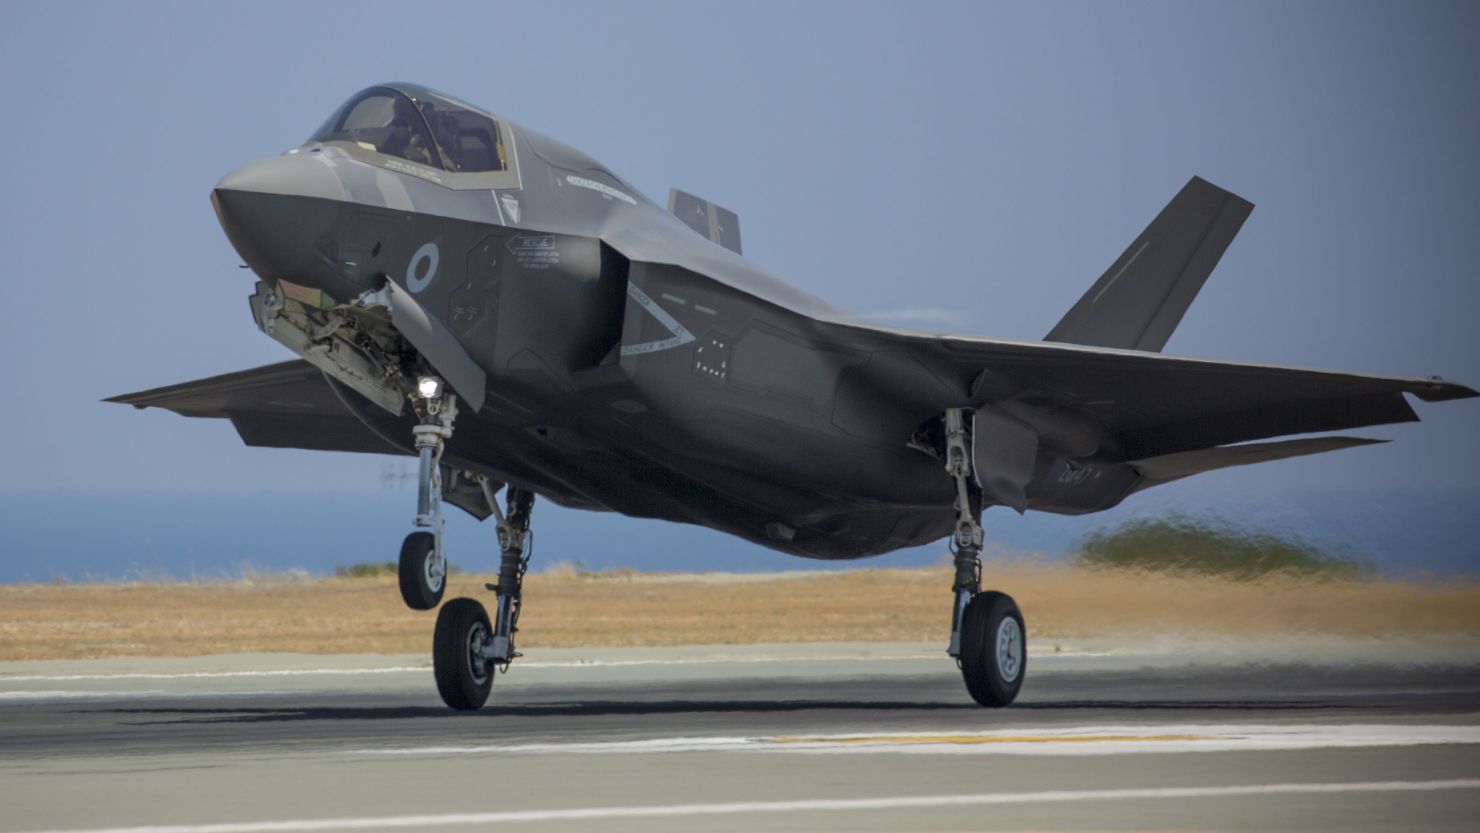 A Royal Air Force F-35B Lightning jet returning from its first operational sortie at RAF Akrotiri, Cyprus.